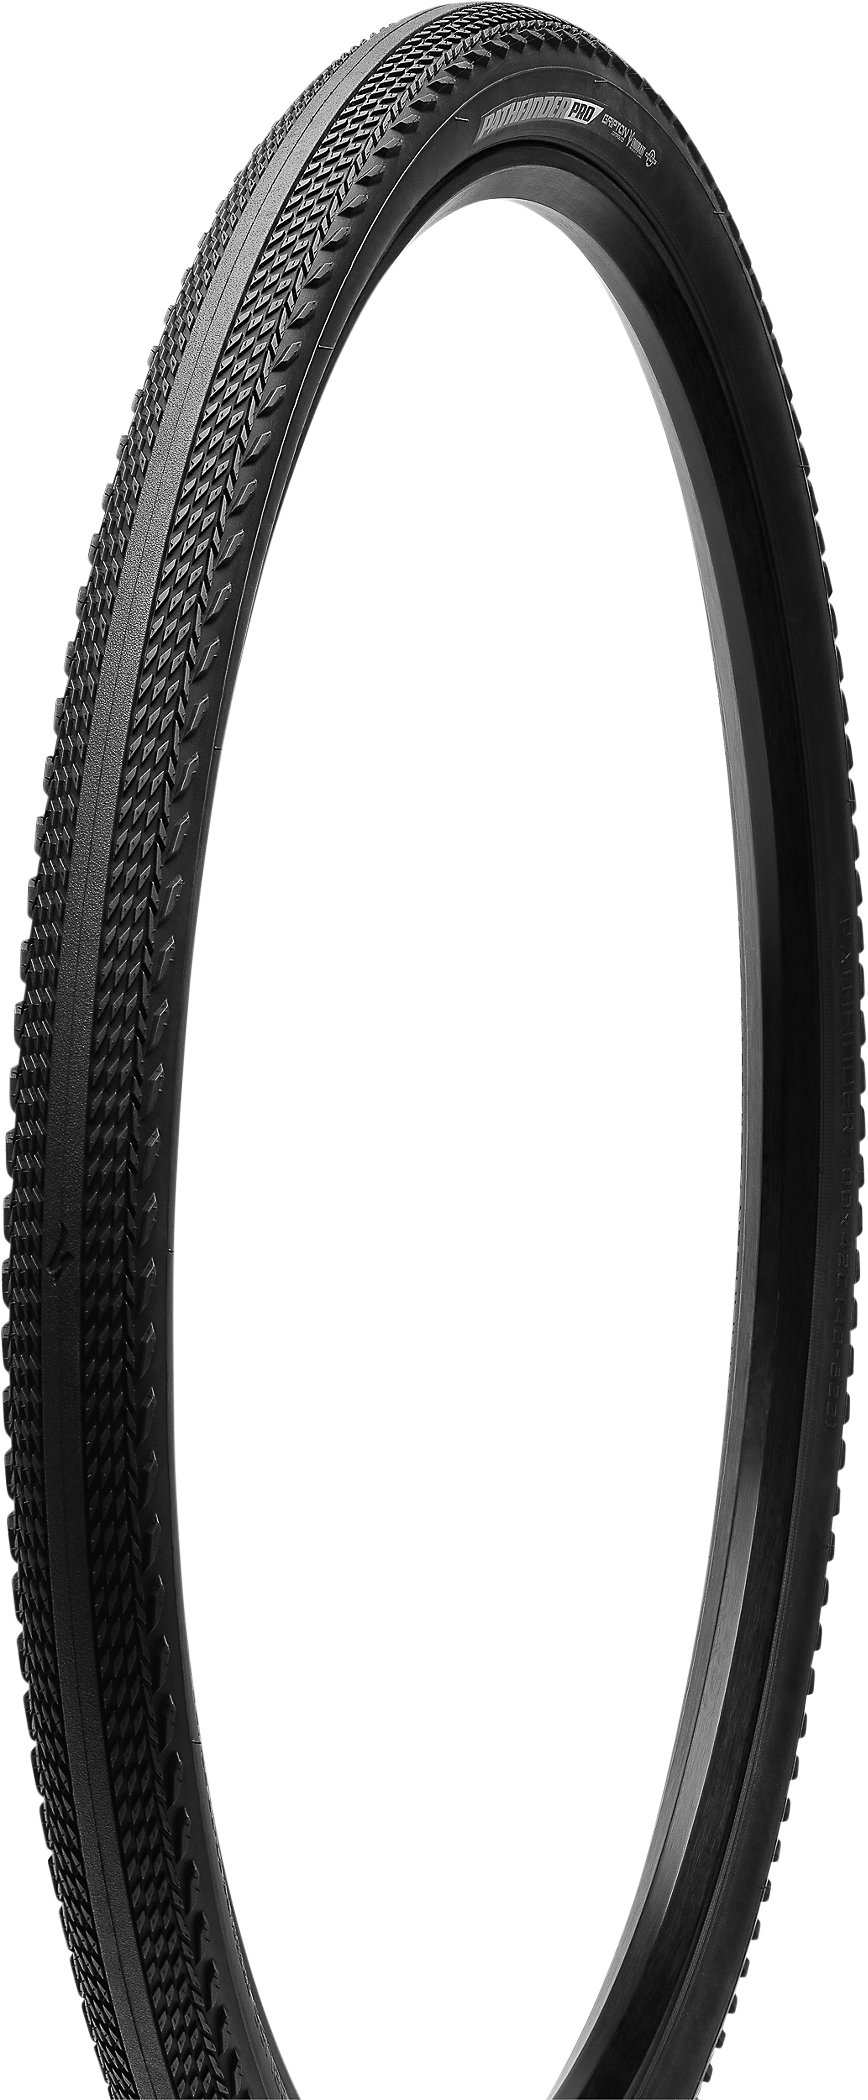 Specialized Pathfinder Pro 2bliss Ready gravel tyres. Black 700x38. Trade for 40-42mm | LFGSS